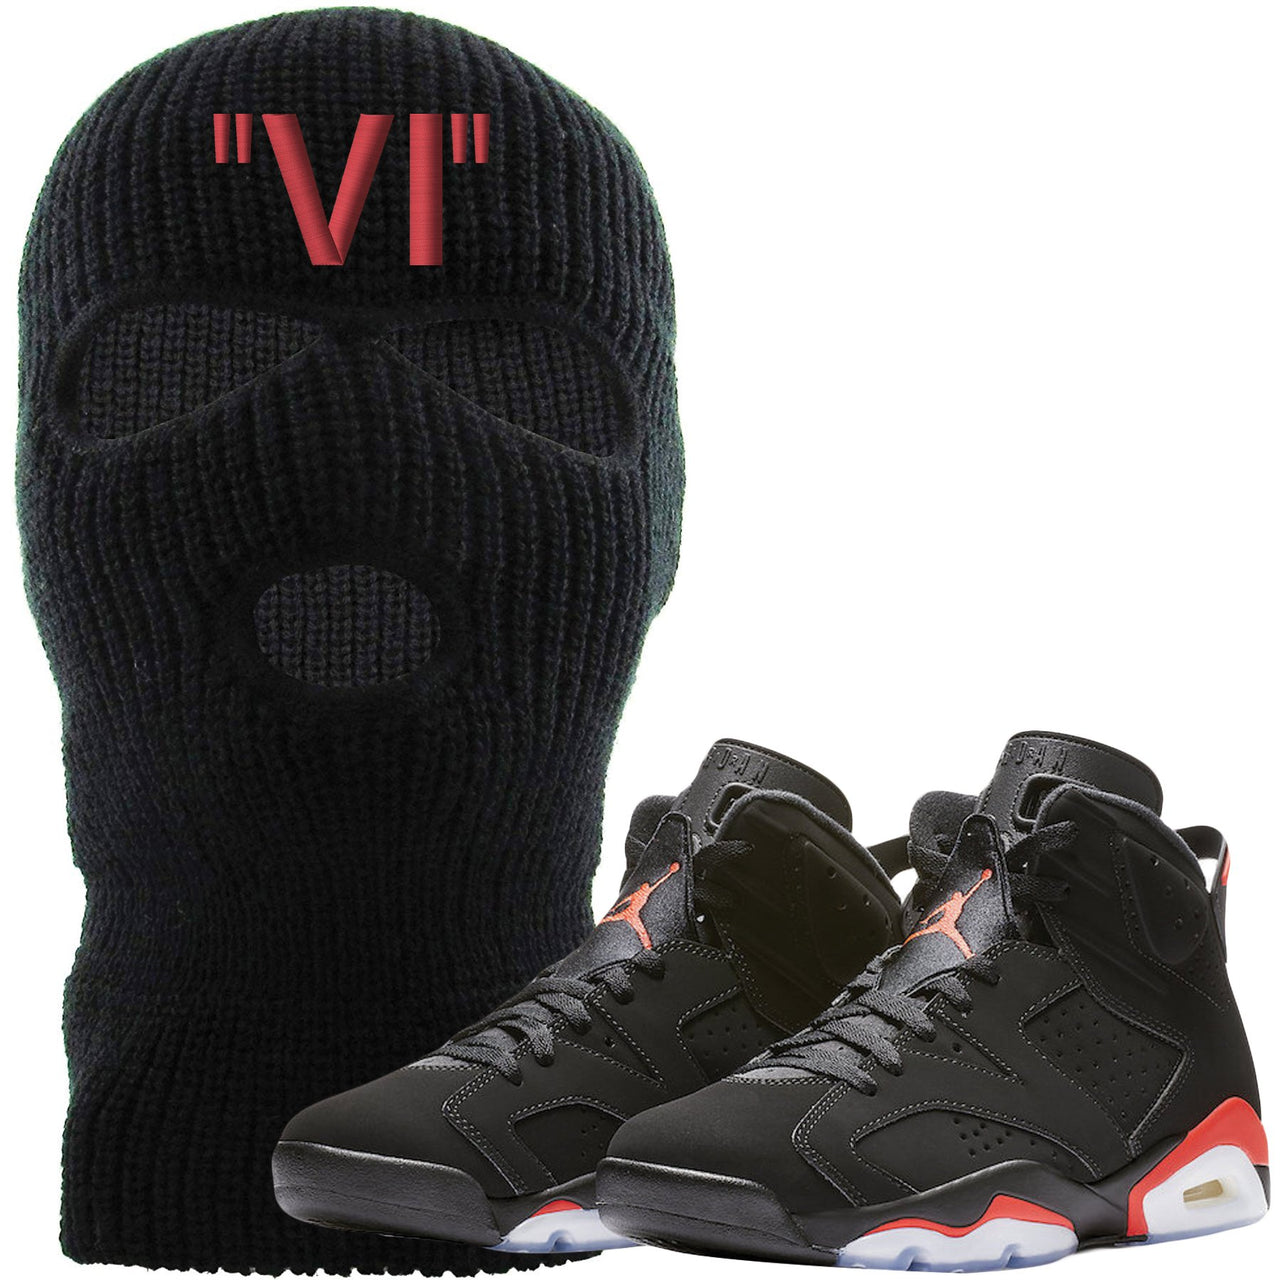 The Jordan 6 Infrared Ski Mask is custom designed to perfectly match the retro Jordan 6 Infrared sneakers from Nike.